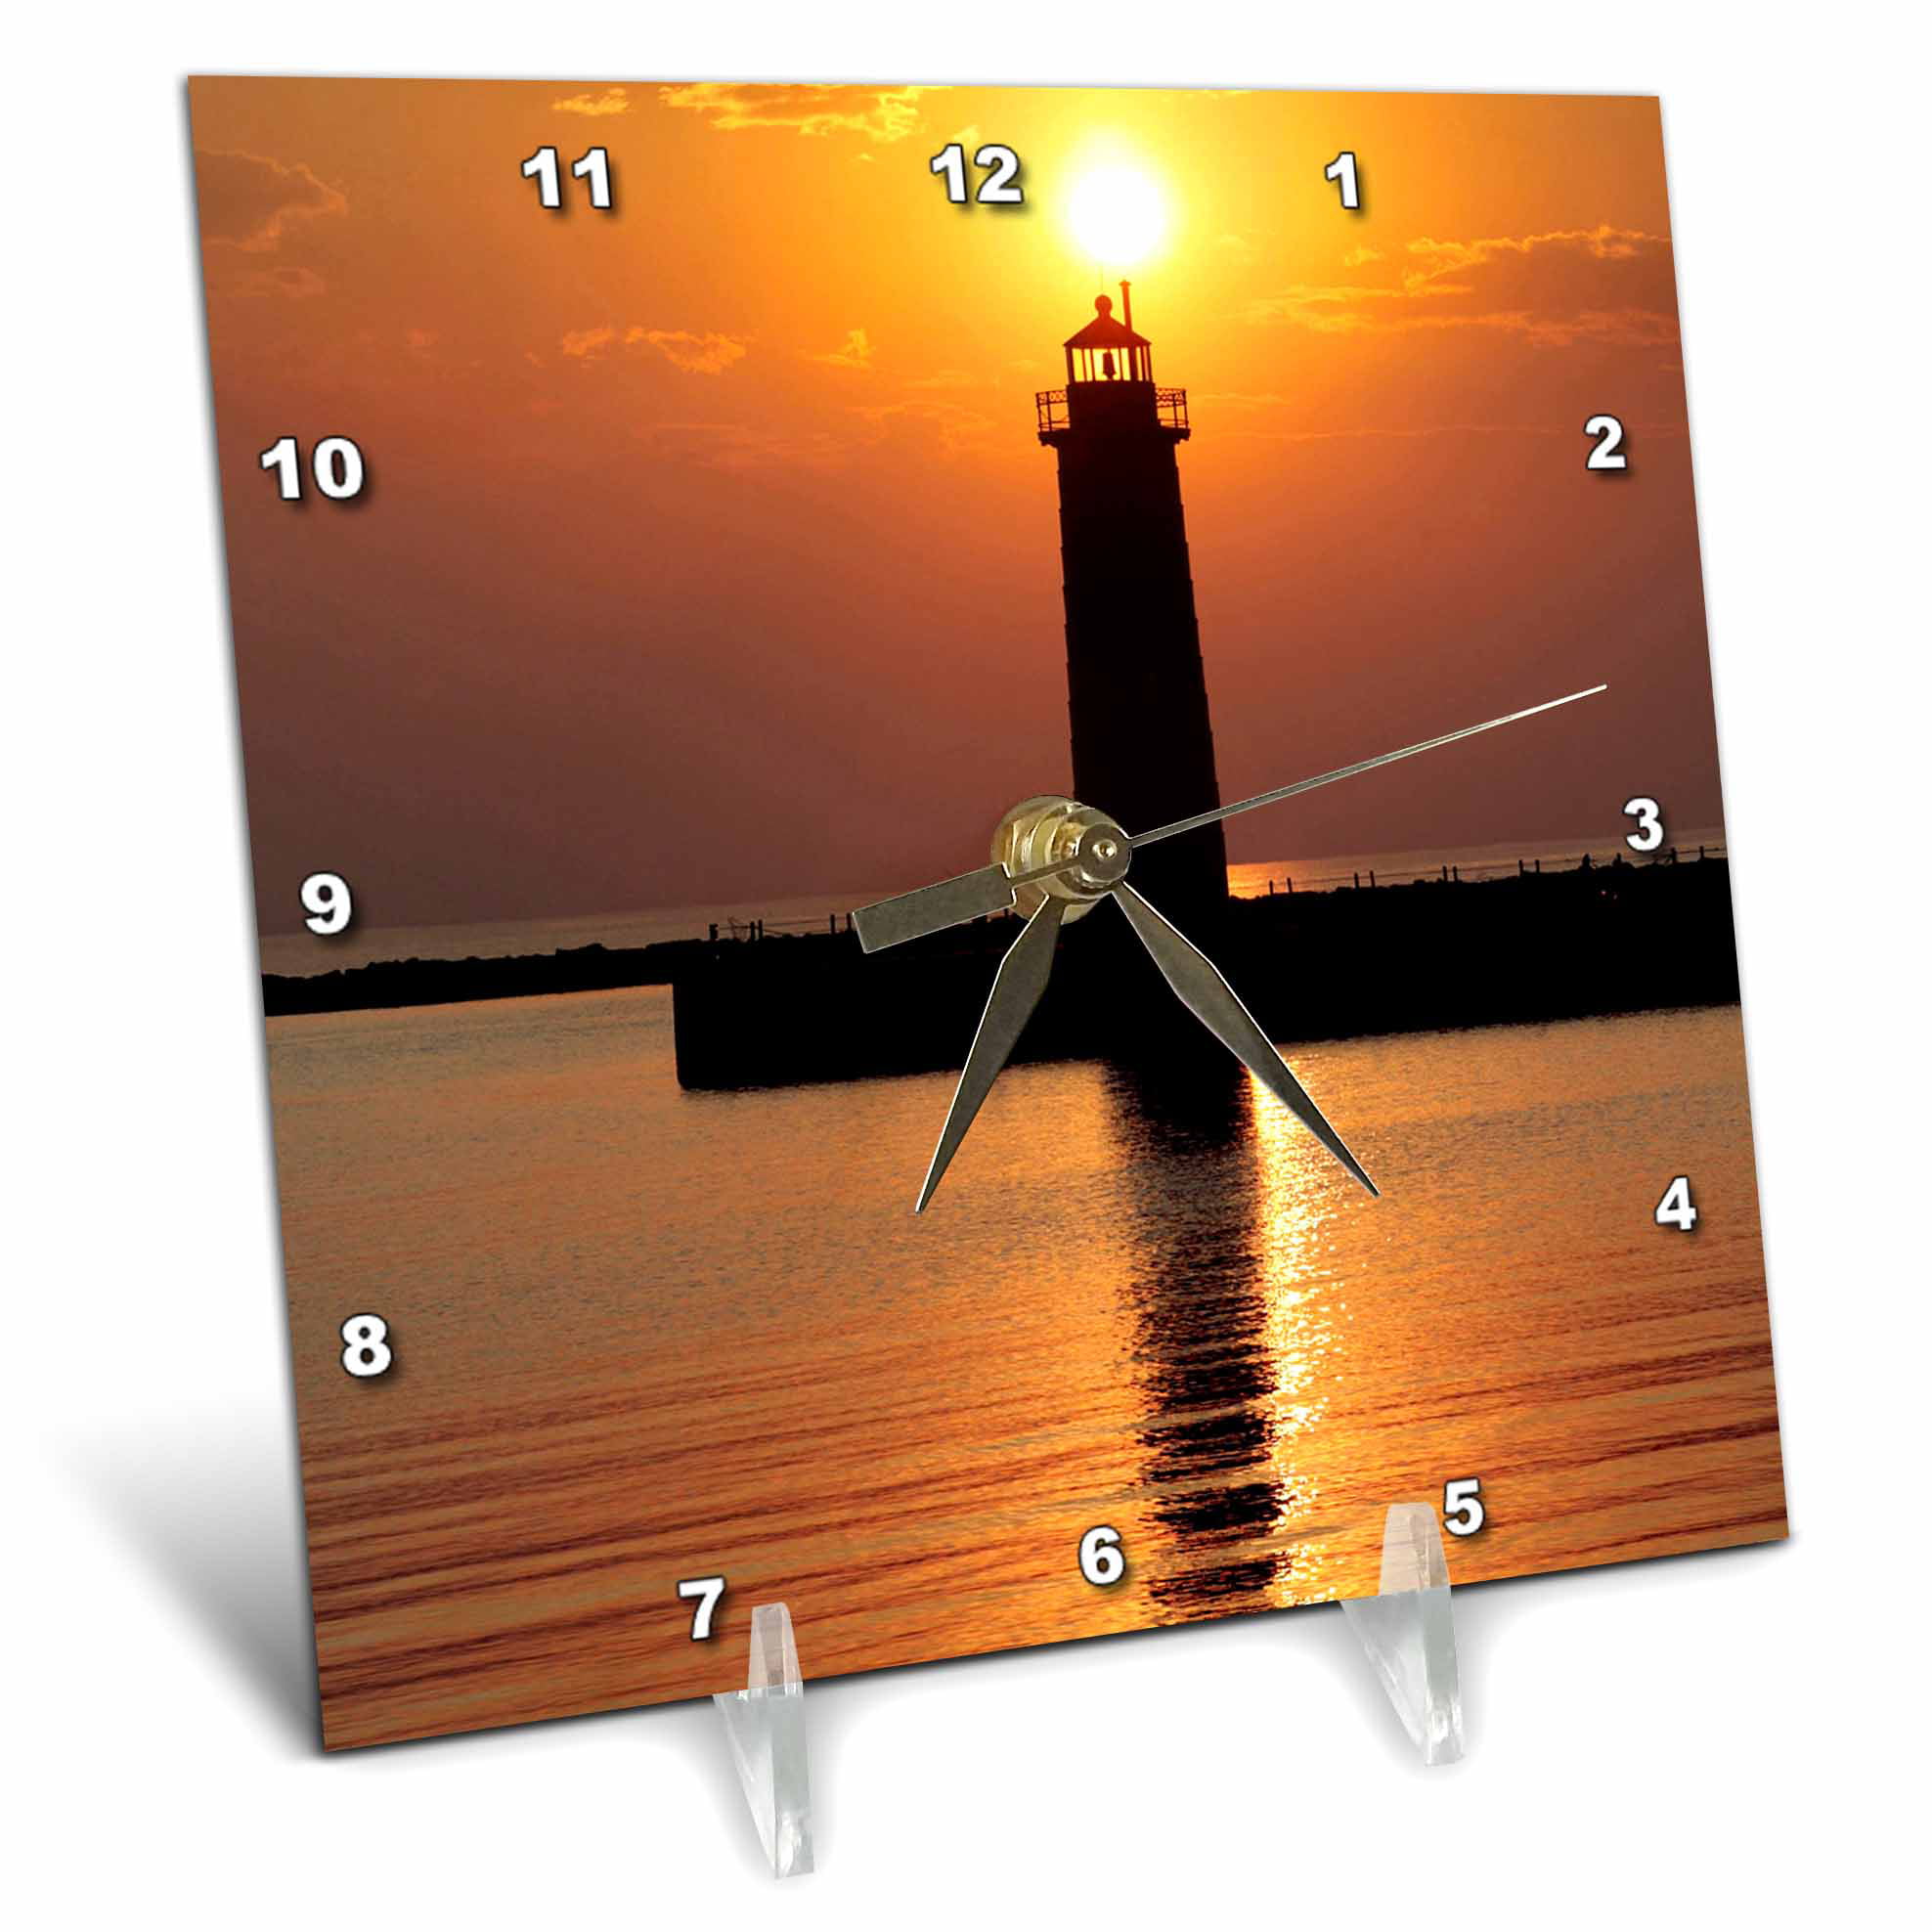 6 by 6-Inch Muskegon Lighthouse on Lake Michigan US23 RER0002 Ric Ergenbright Desk Clock 3dRose dc_91212_1 MI 